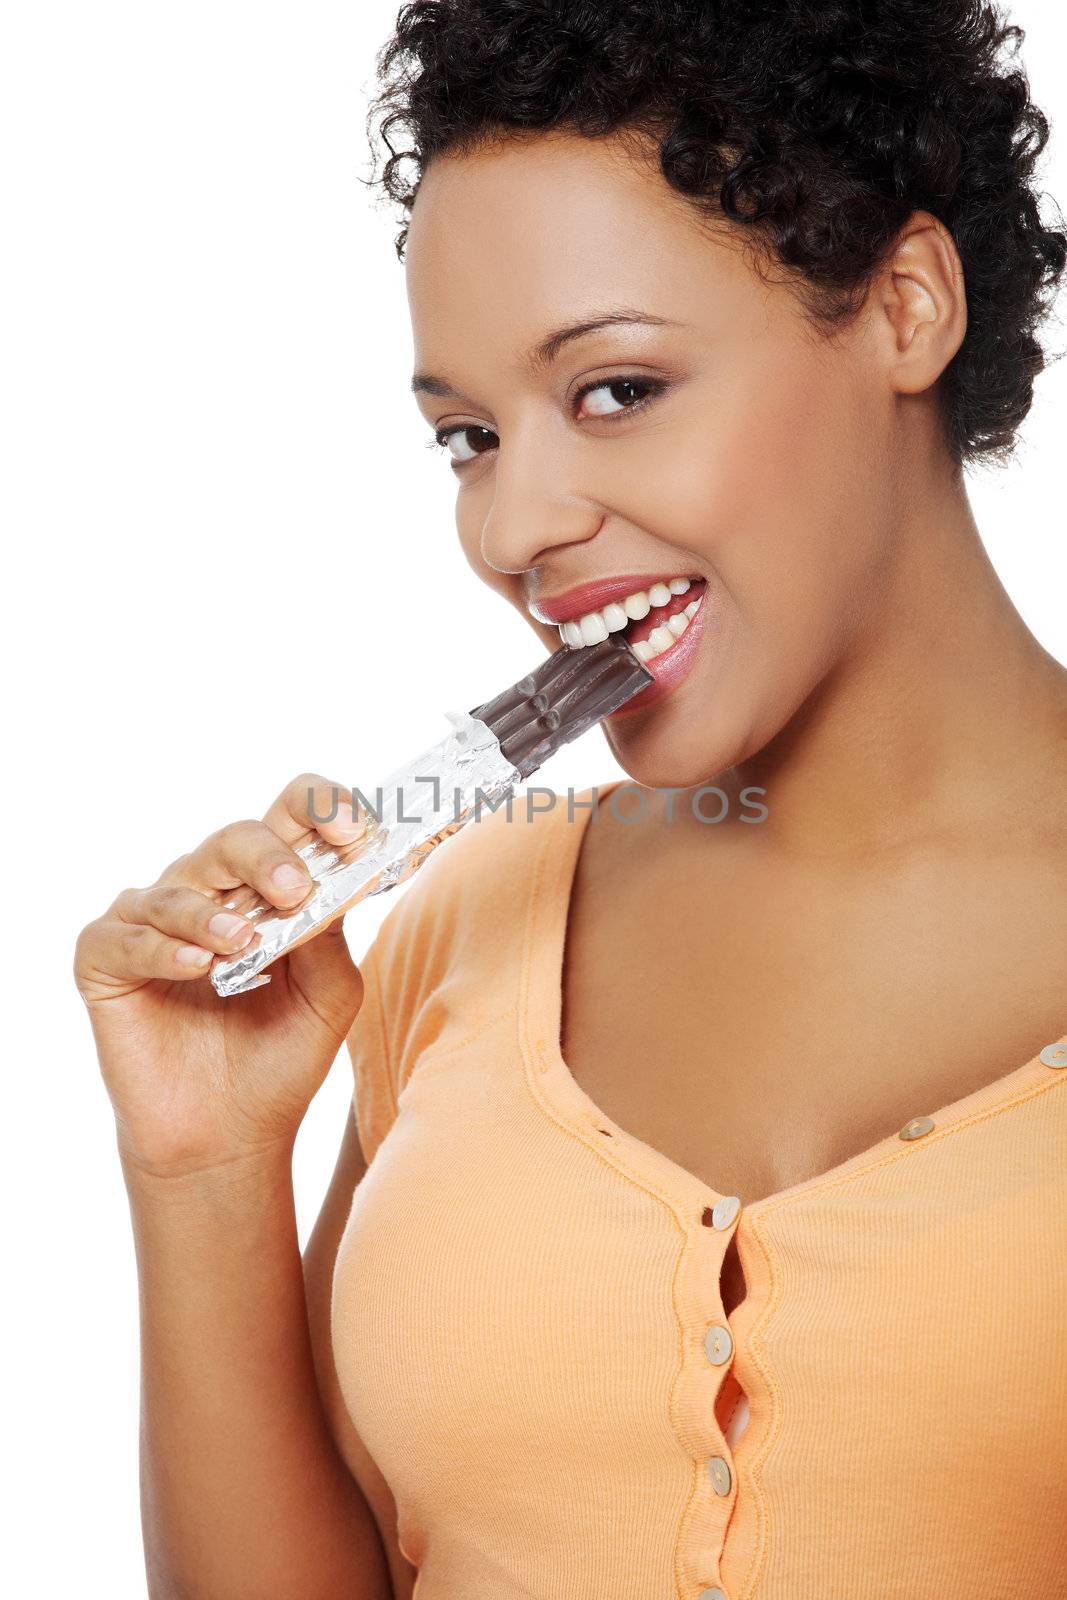 Portrait of a beautiful young woman eating a chocolate, smiling to the camera, over a white backgroung.